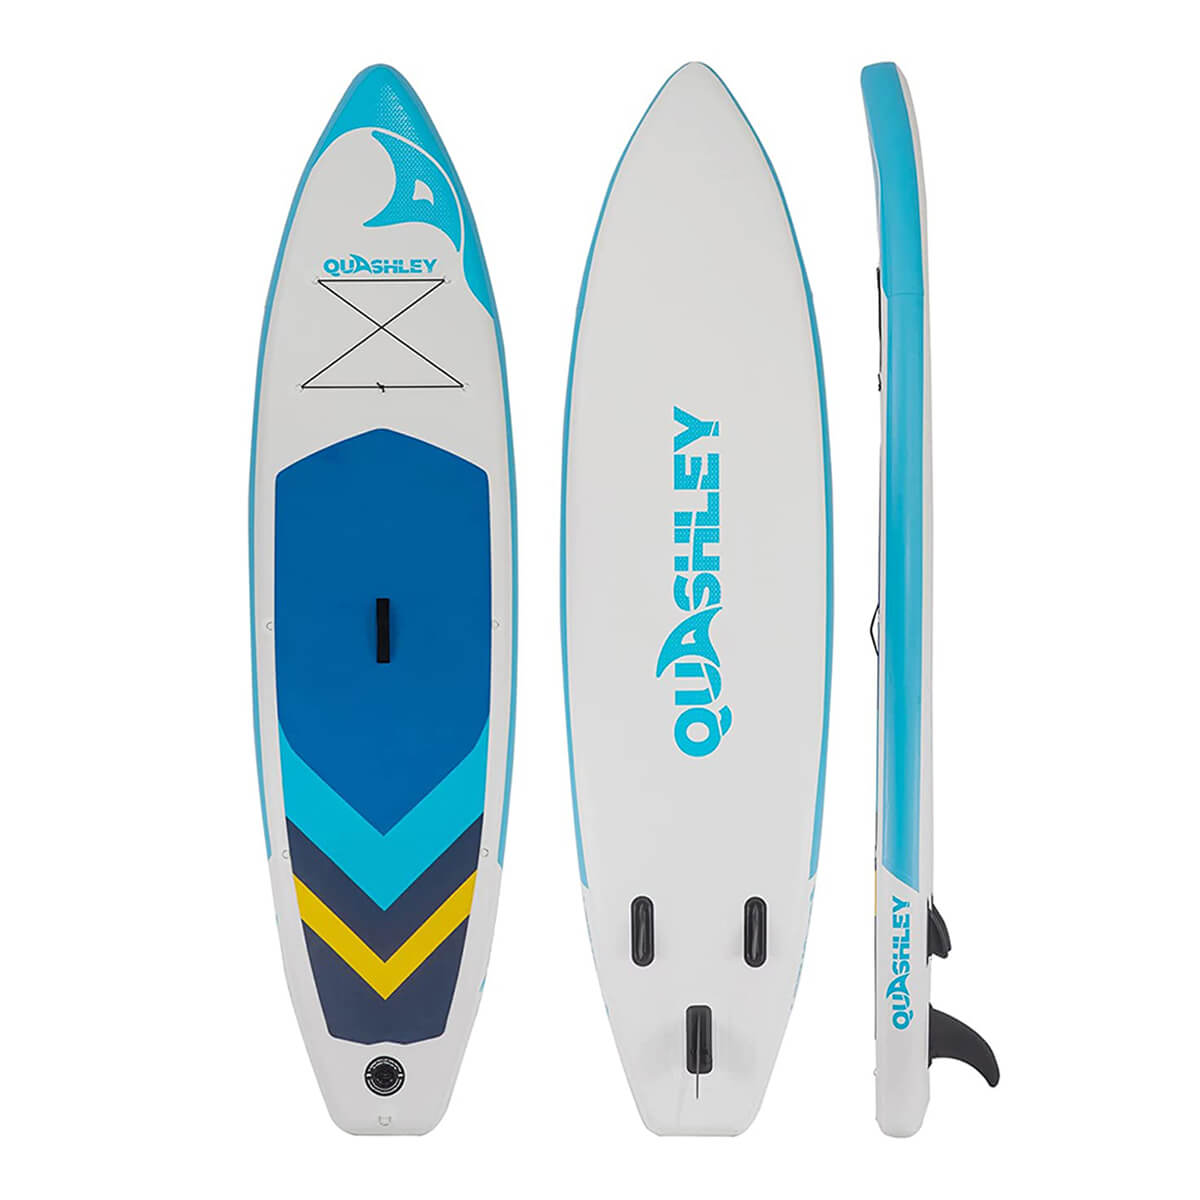 Inflatable Quashley Accessories Surfboard Board SUP Up Paddle Premium with Stand